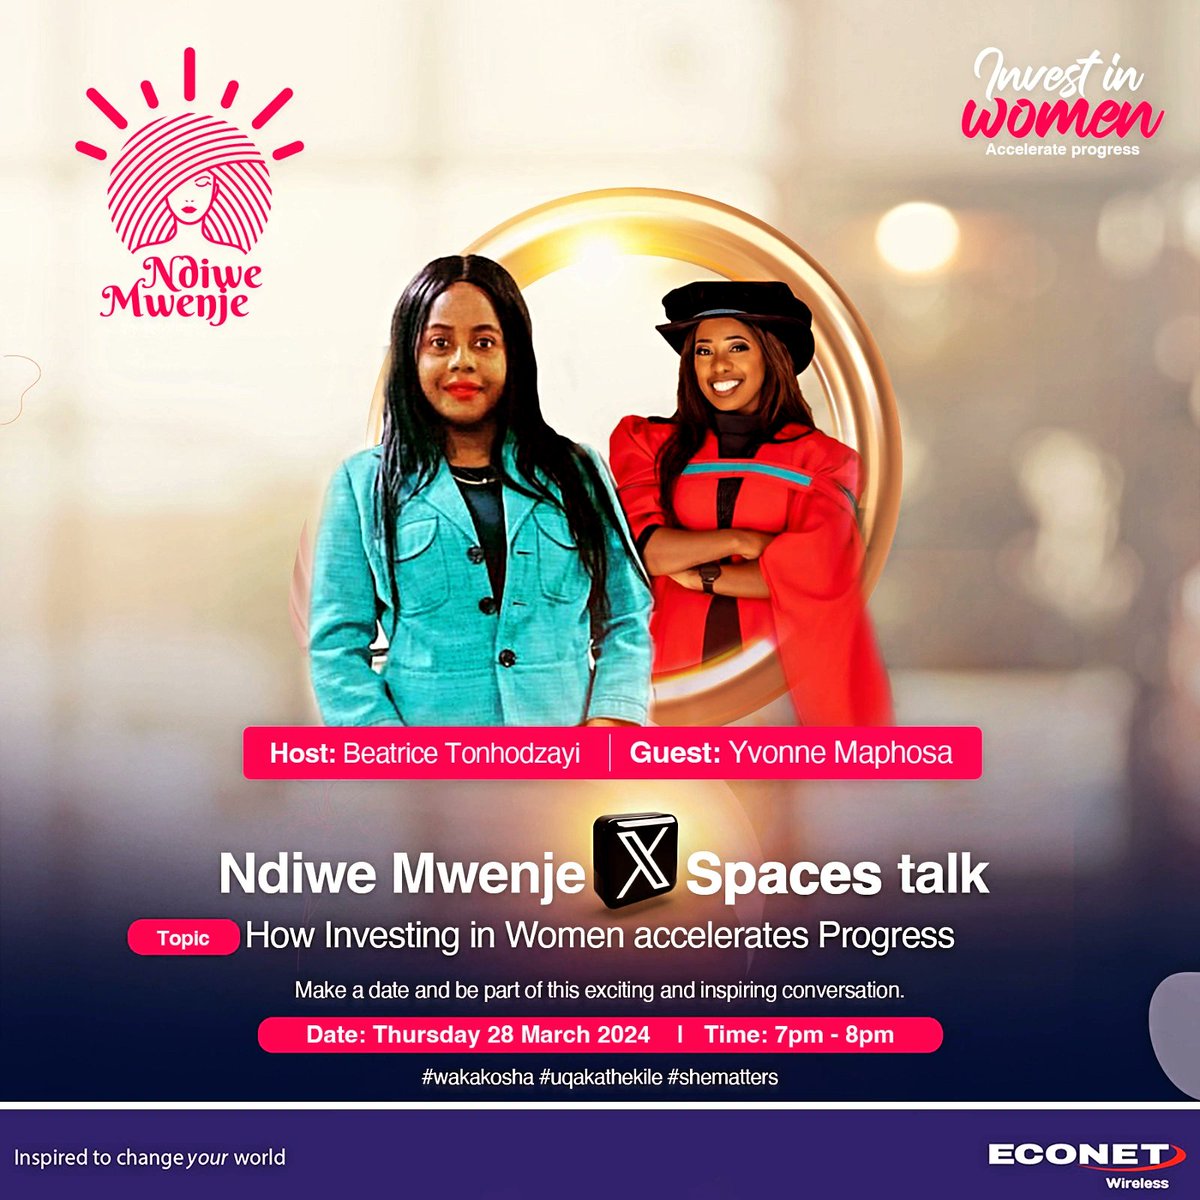 Reminder: 7pm we are on. #NdiweMwenje #SheMatters Join us to celebrate women's strength, resilience, and achievements globally. If you advocate for investing in women and accelerating progress, this X spaces talk is for you; x.com/i/spaces/1jMJg… @Yvonne_Maphosa